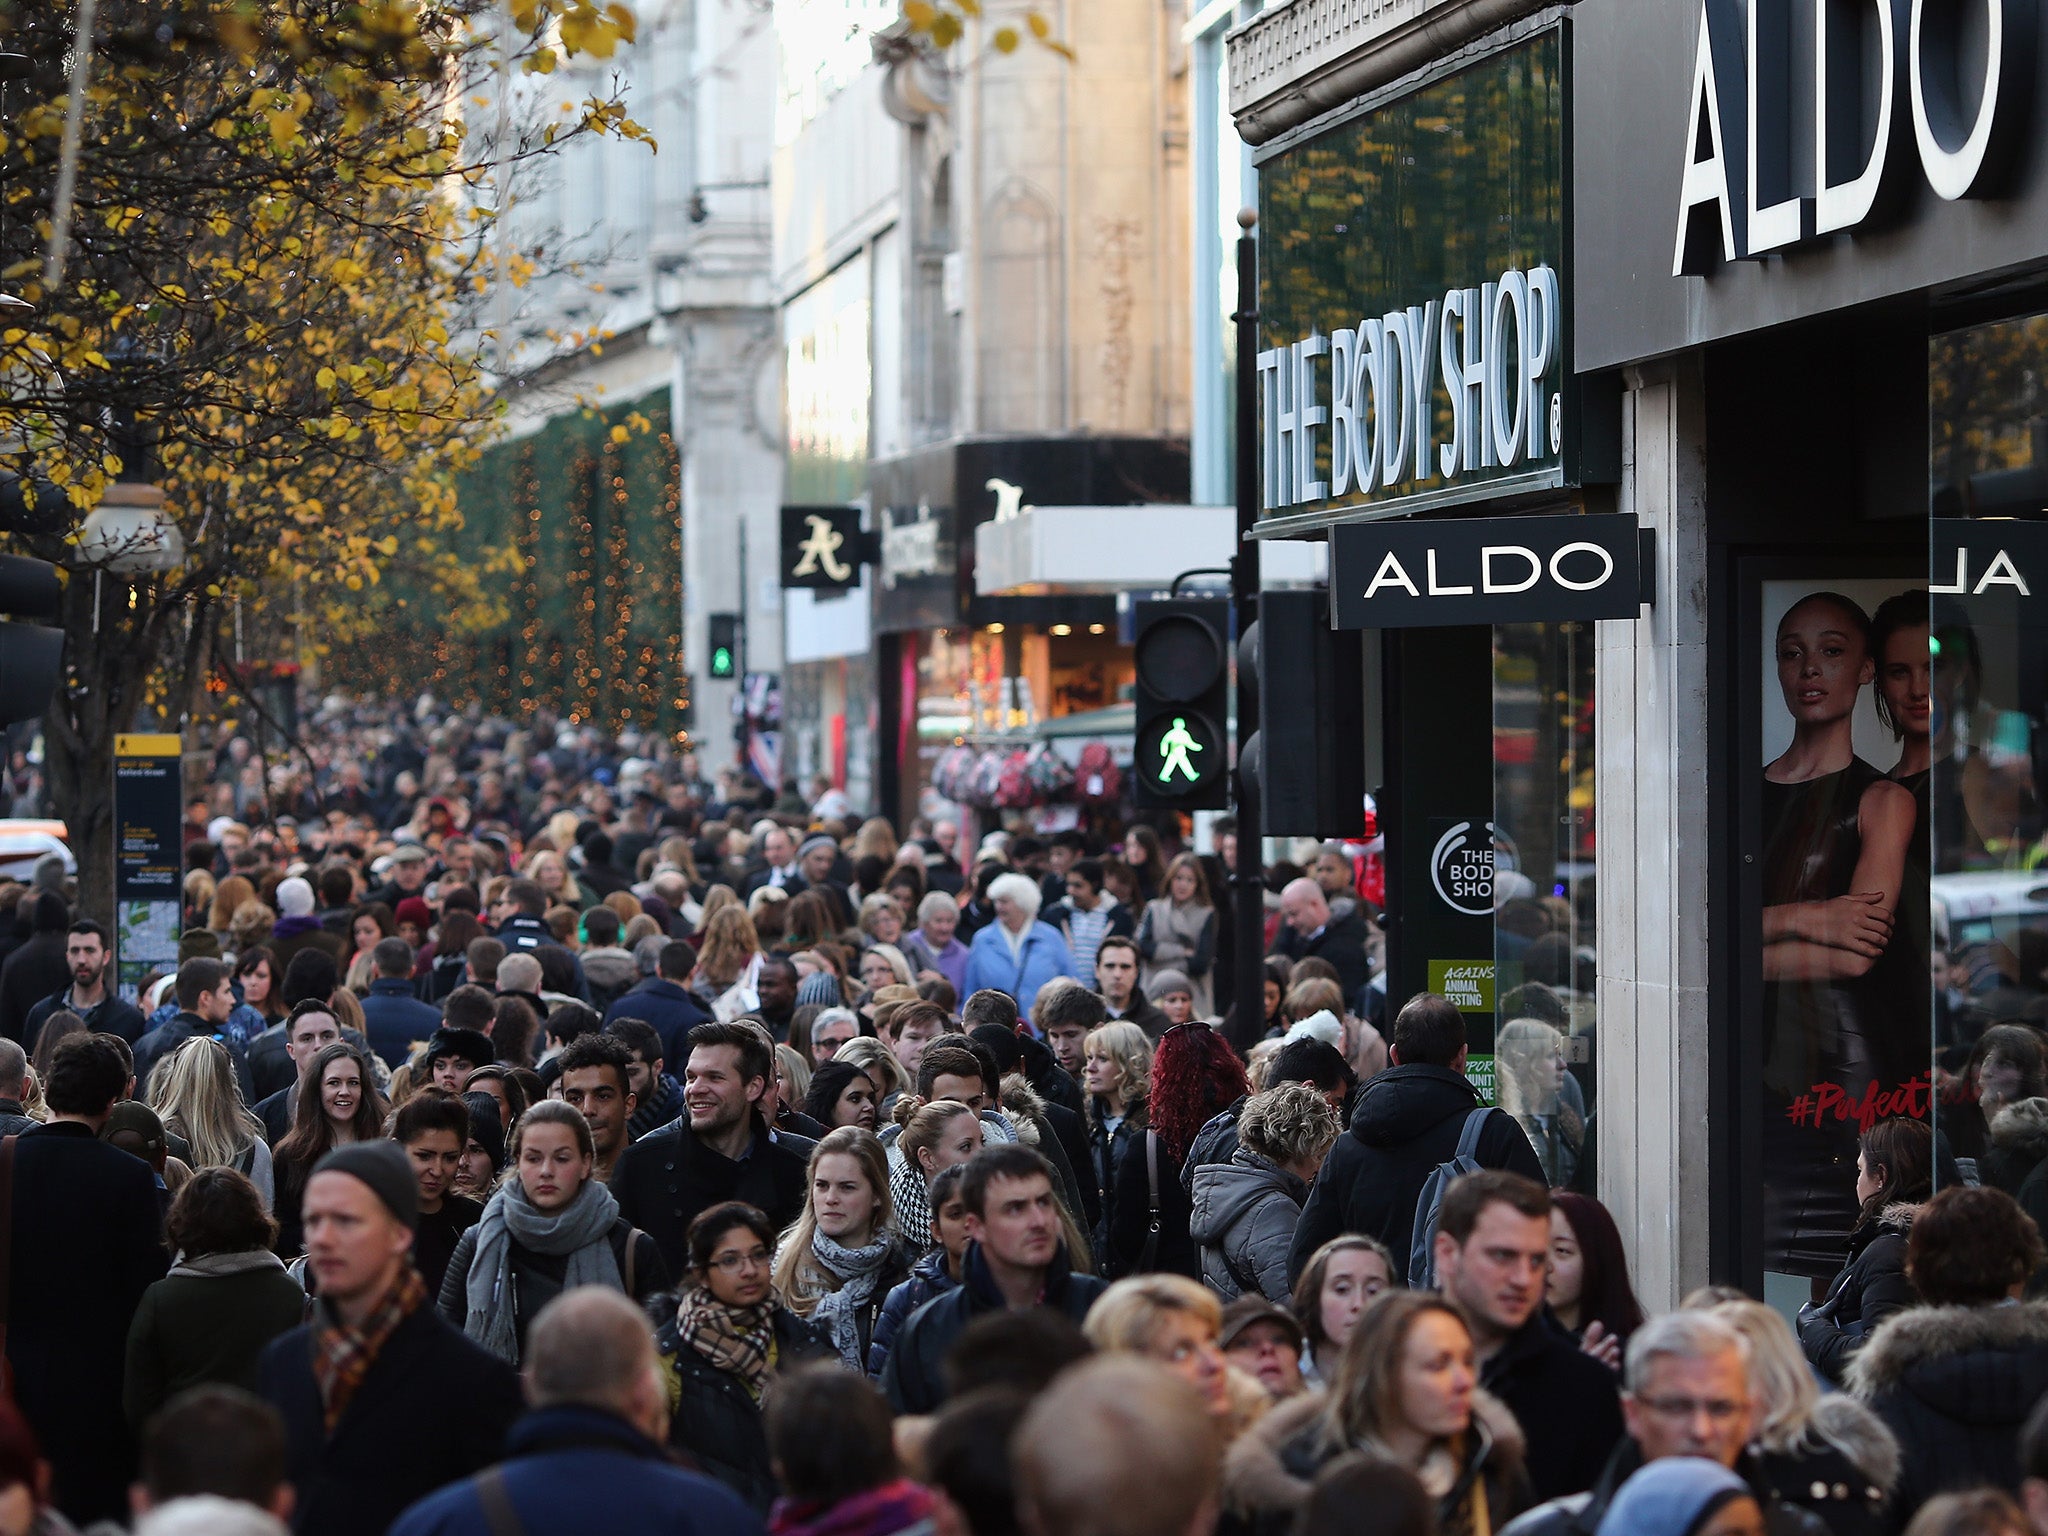 Christmas shoppers crowd Oxford Street on December 13, 2014 in London, England.